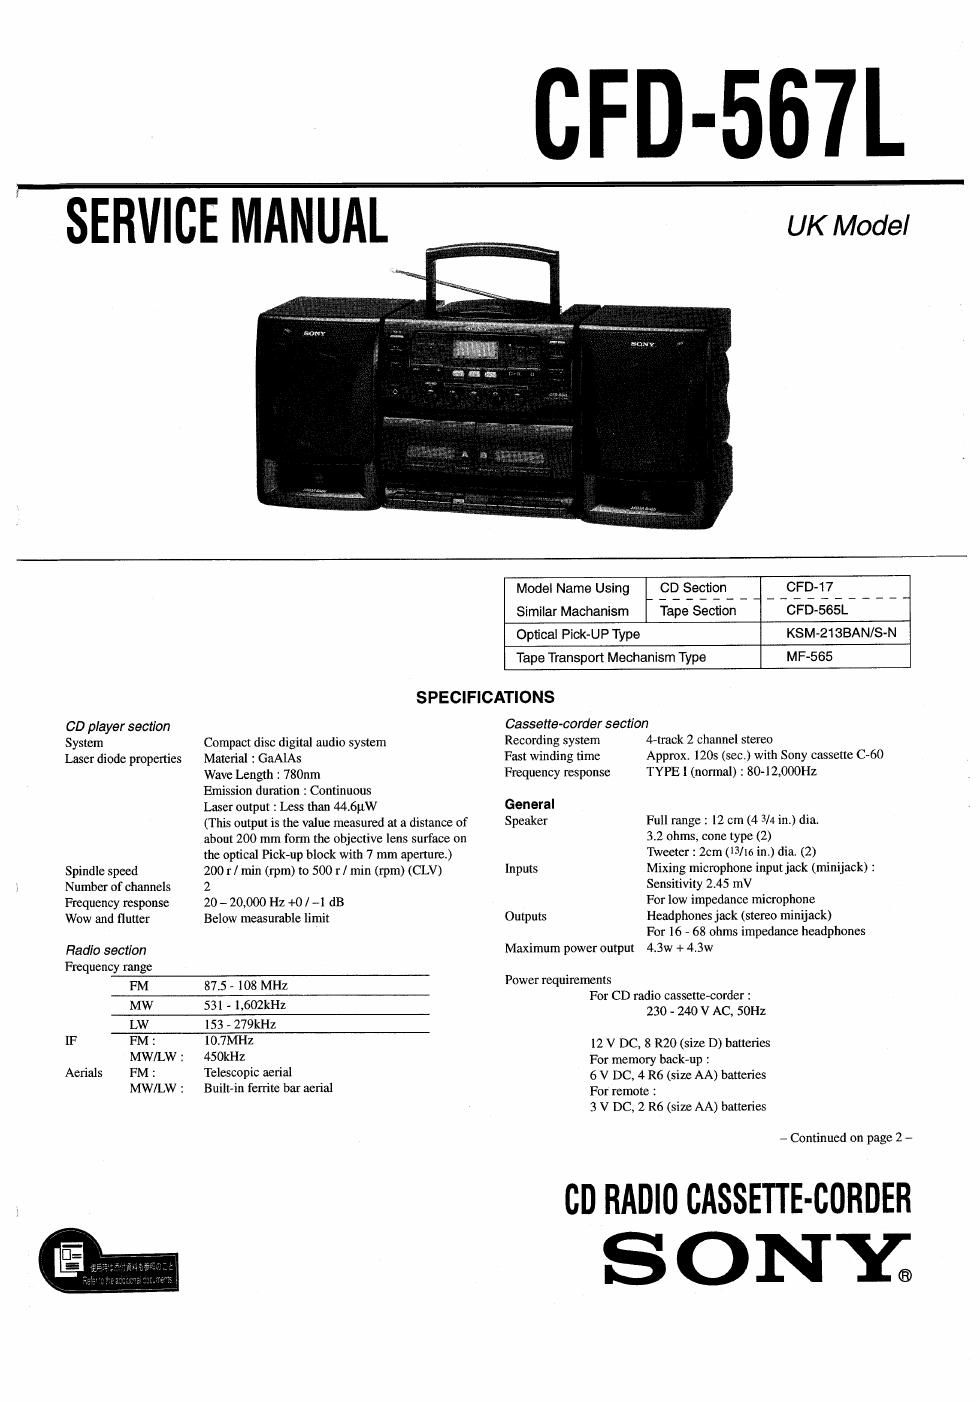 sony cfd 567 l service manual